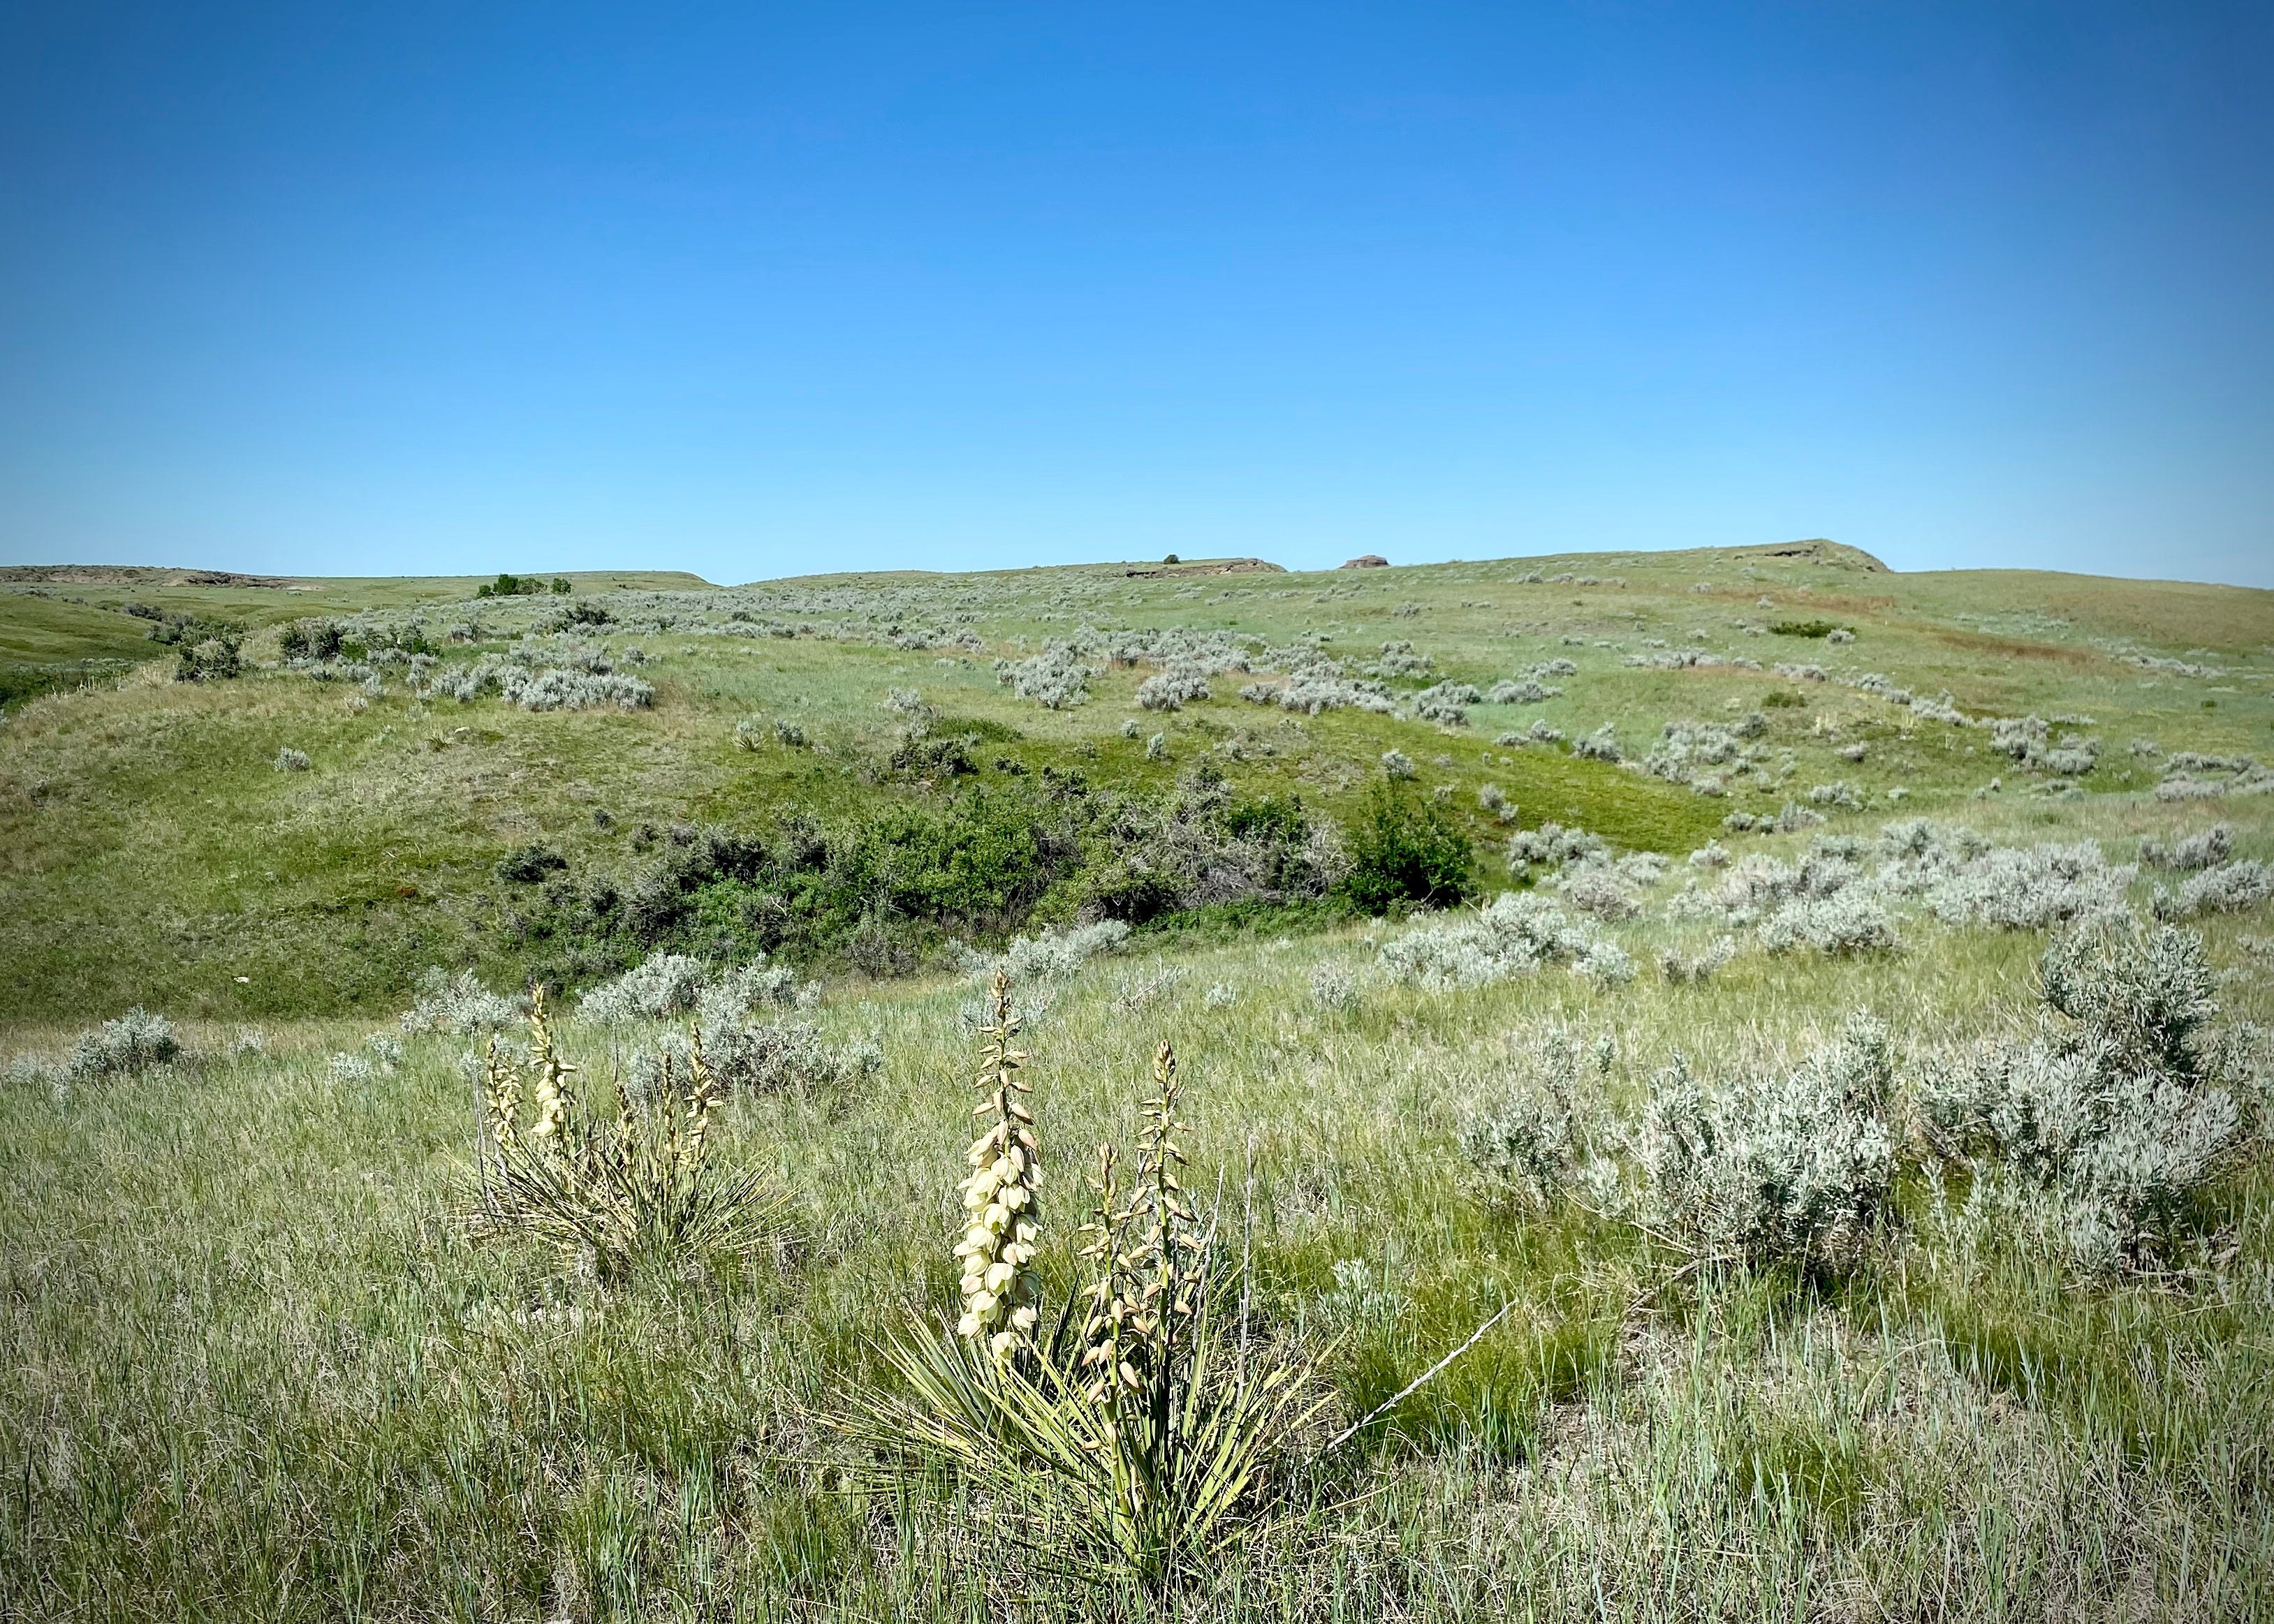 image shows sagebrush and grass covered hillsides slope up and down across the view with a clear blue sky overhead